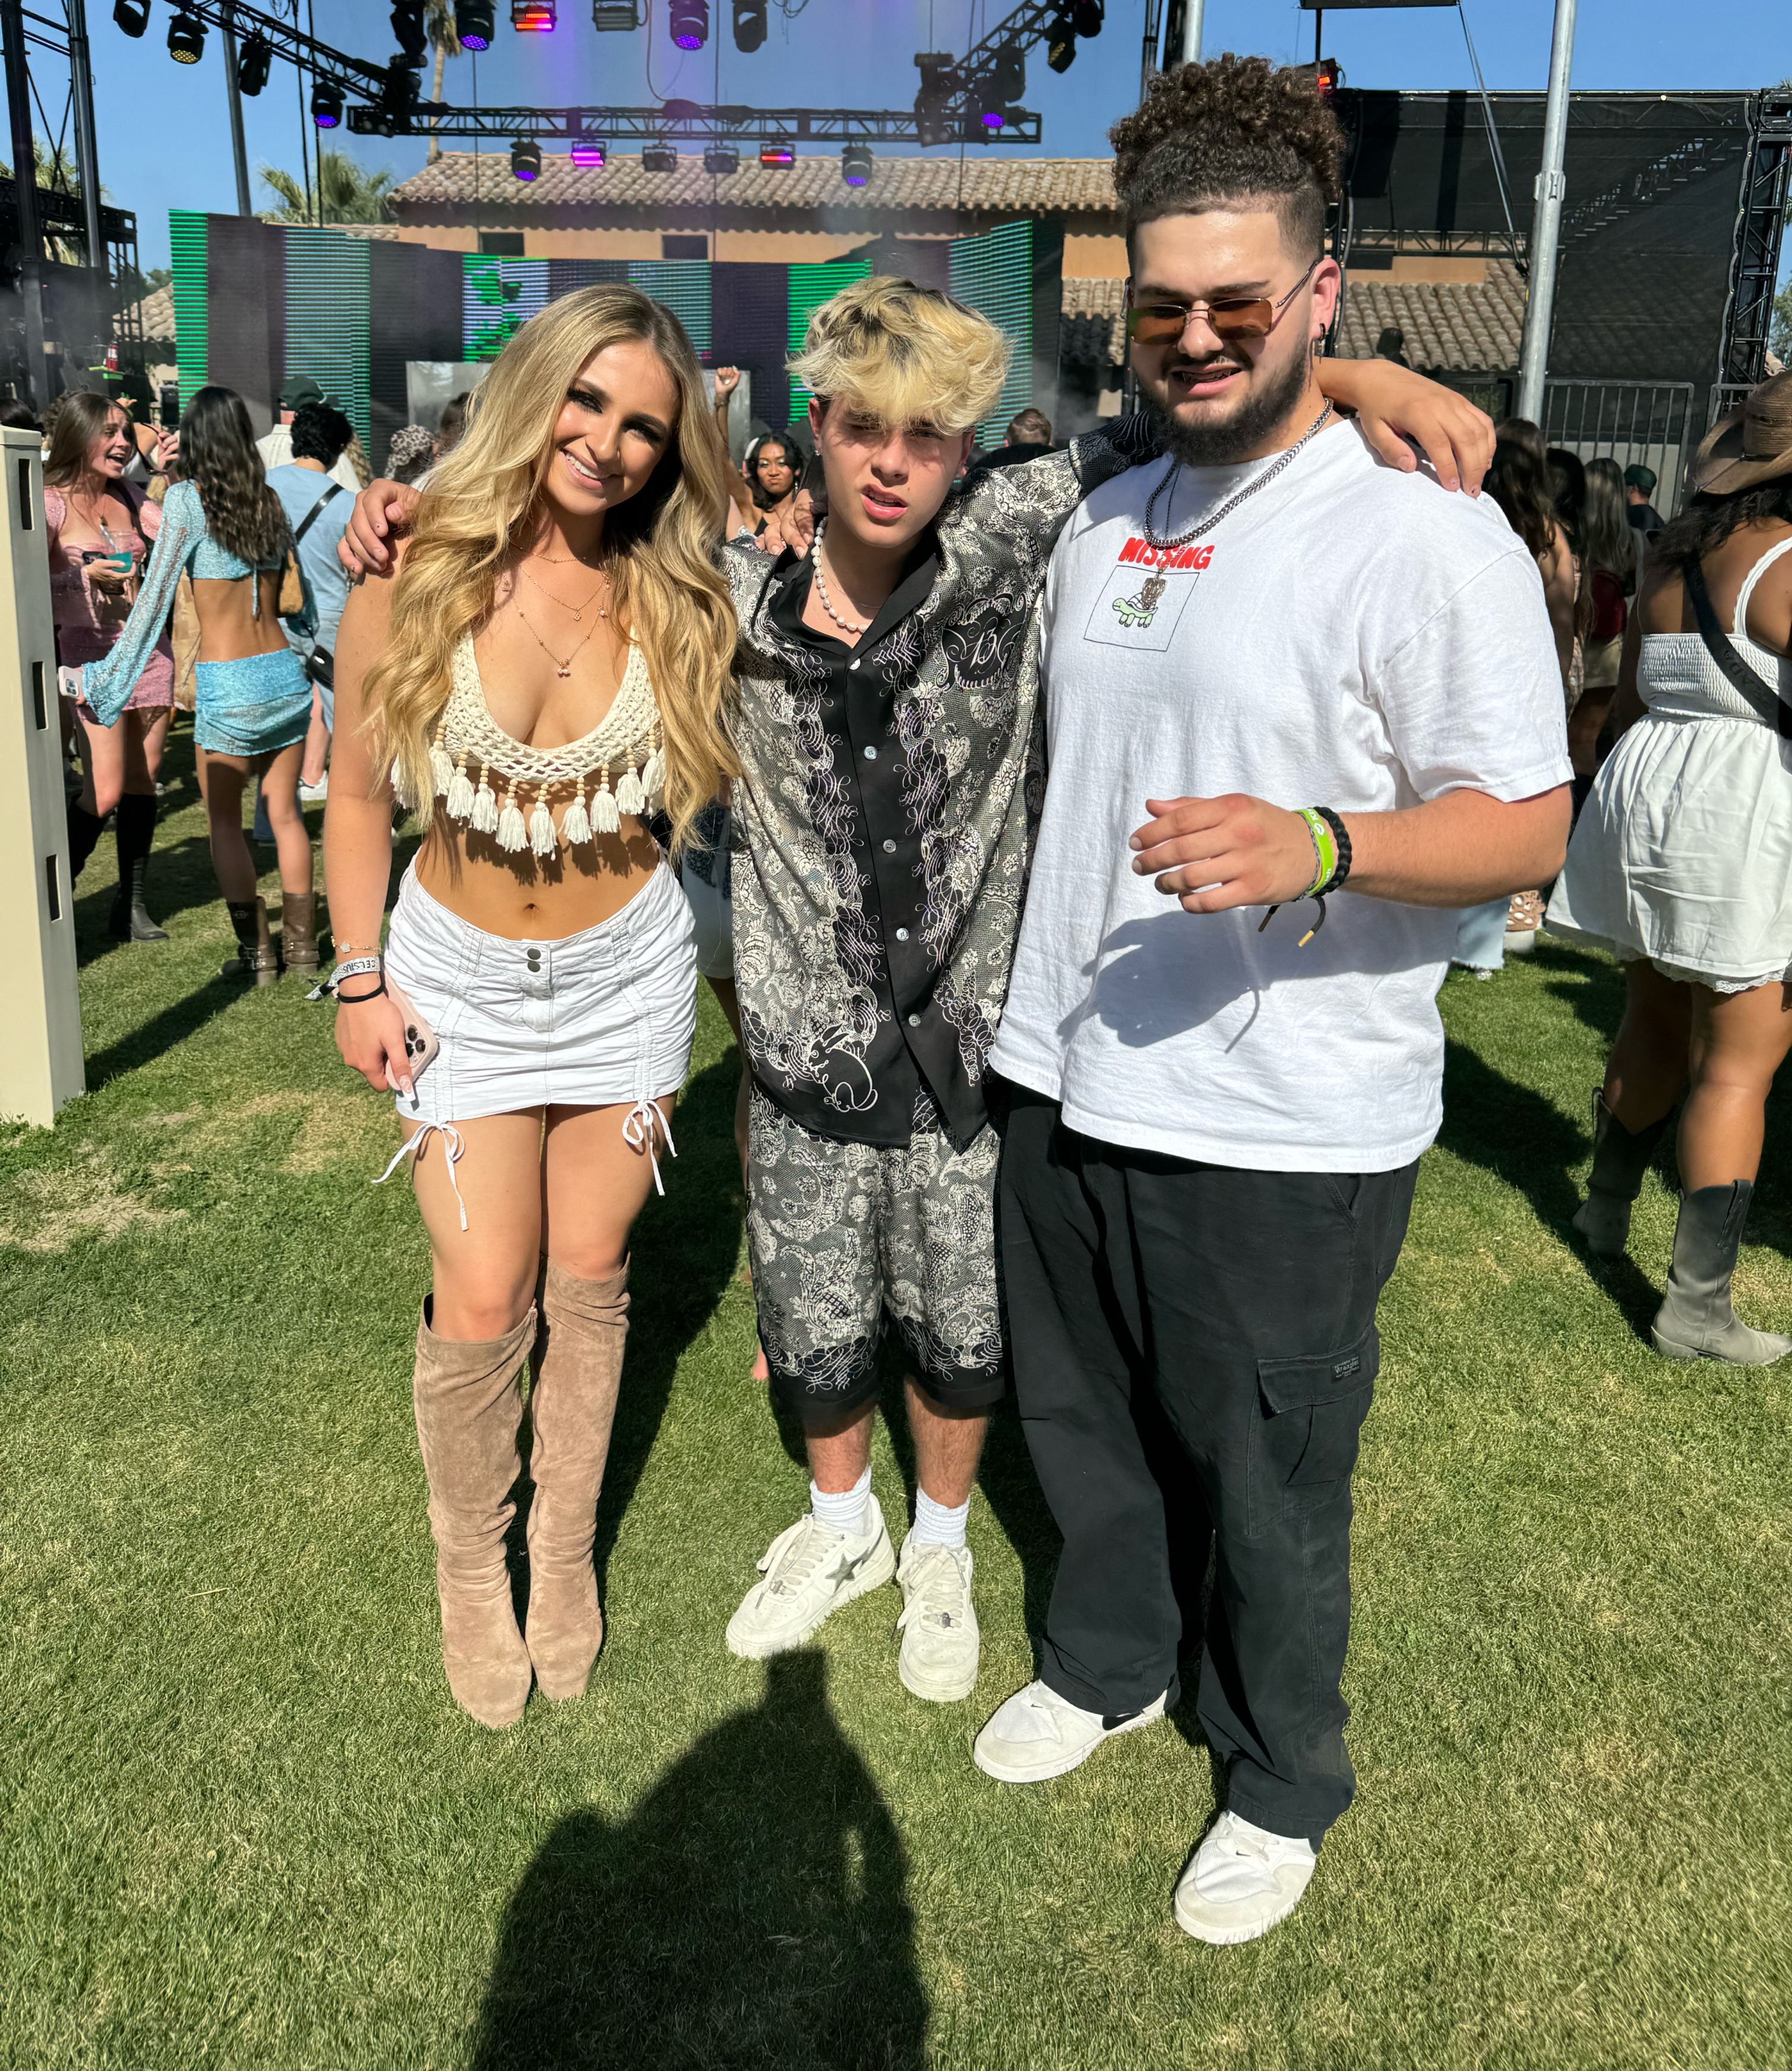 Isabella and Gavin attended the Coachella Valley Music And Arts Festival together